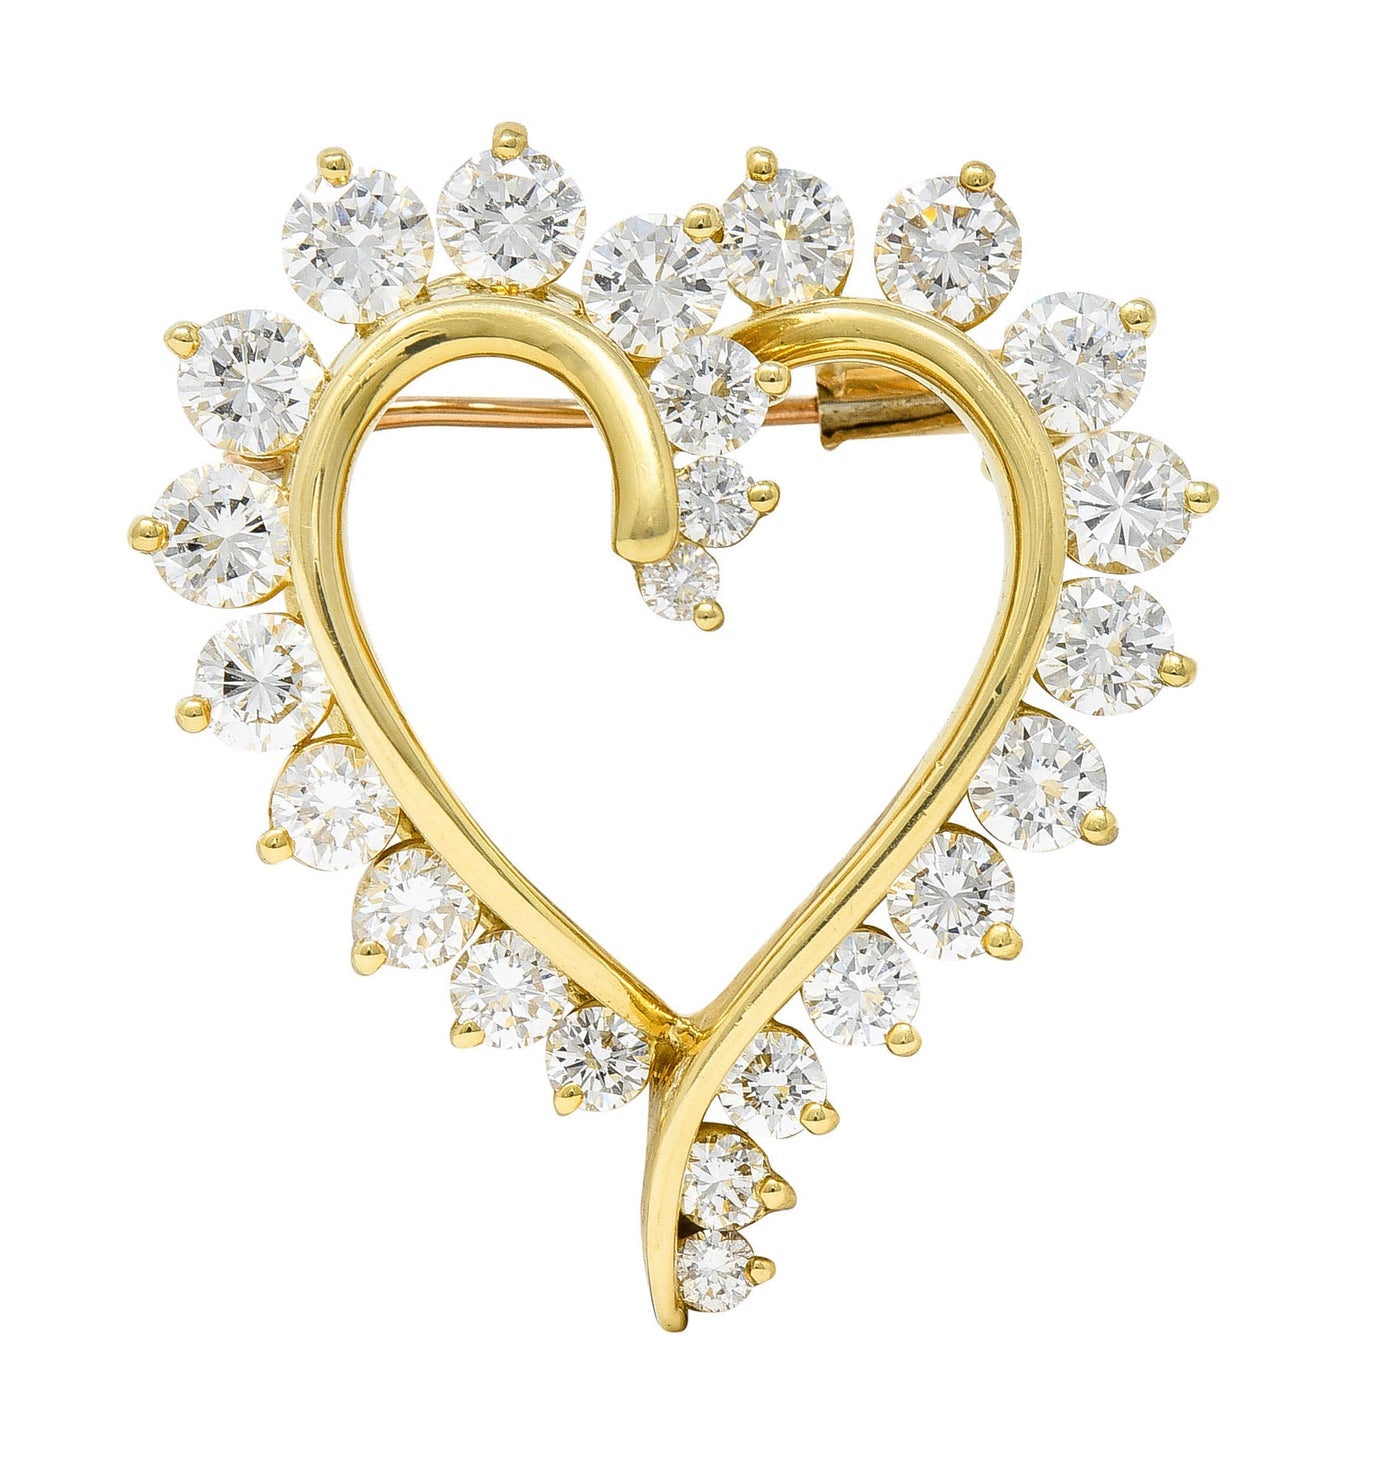 Vintage Gold Heart Brooch Diamond Heart Jewelry Valentine's Day Gift